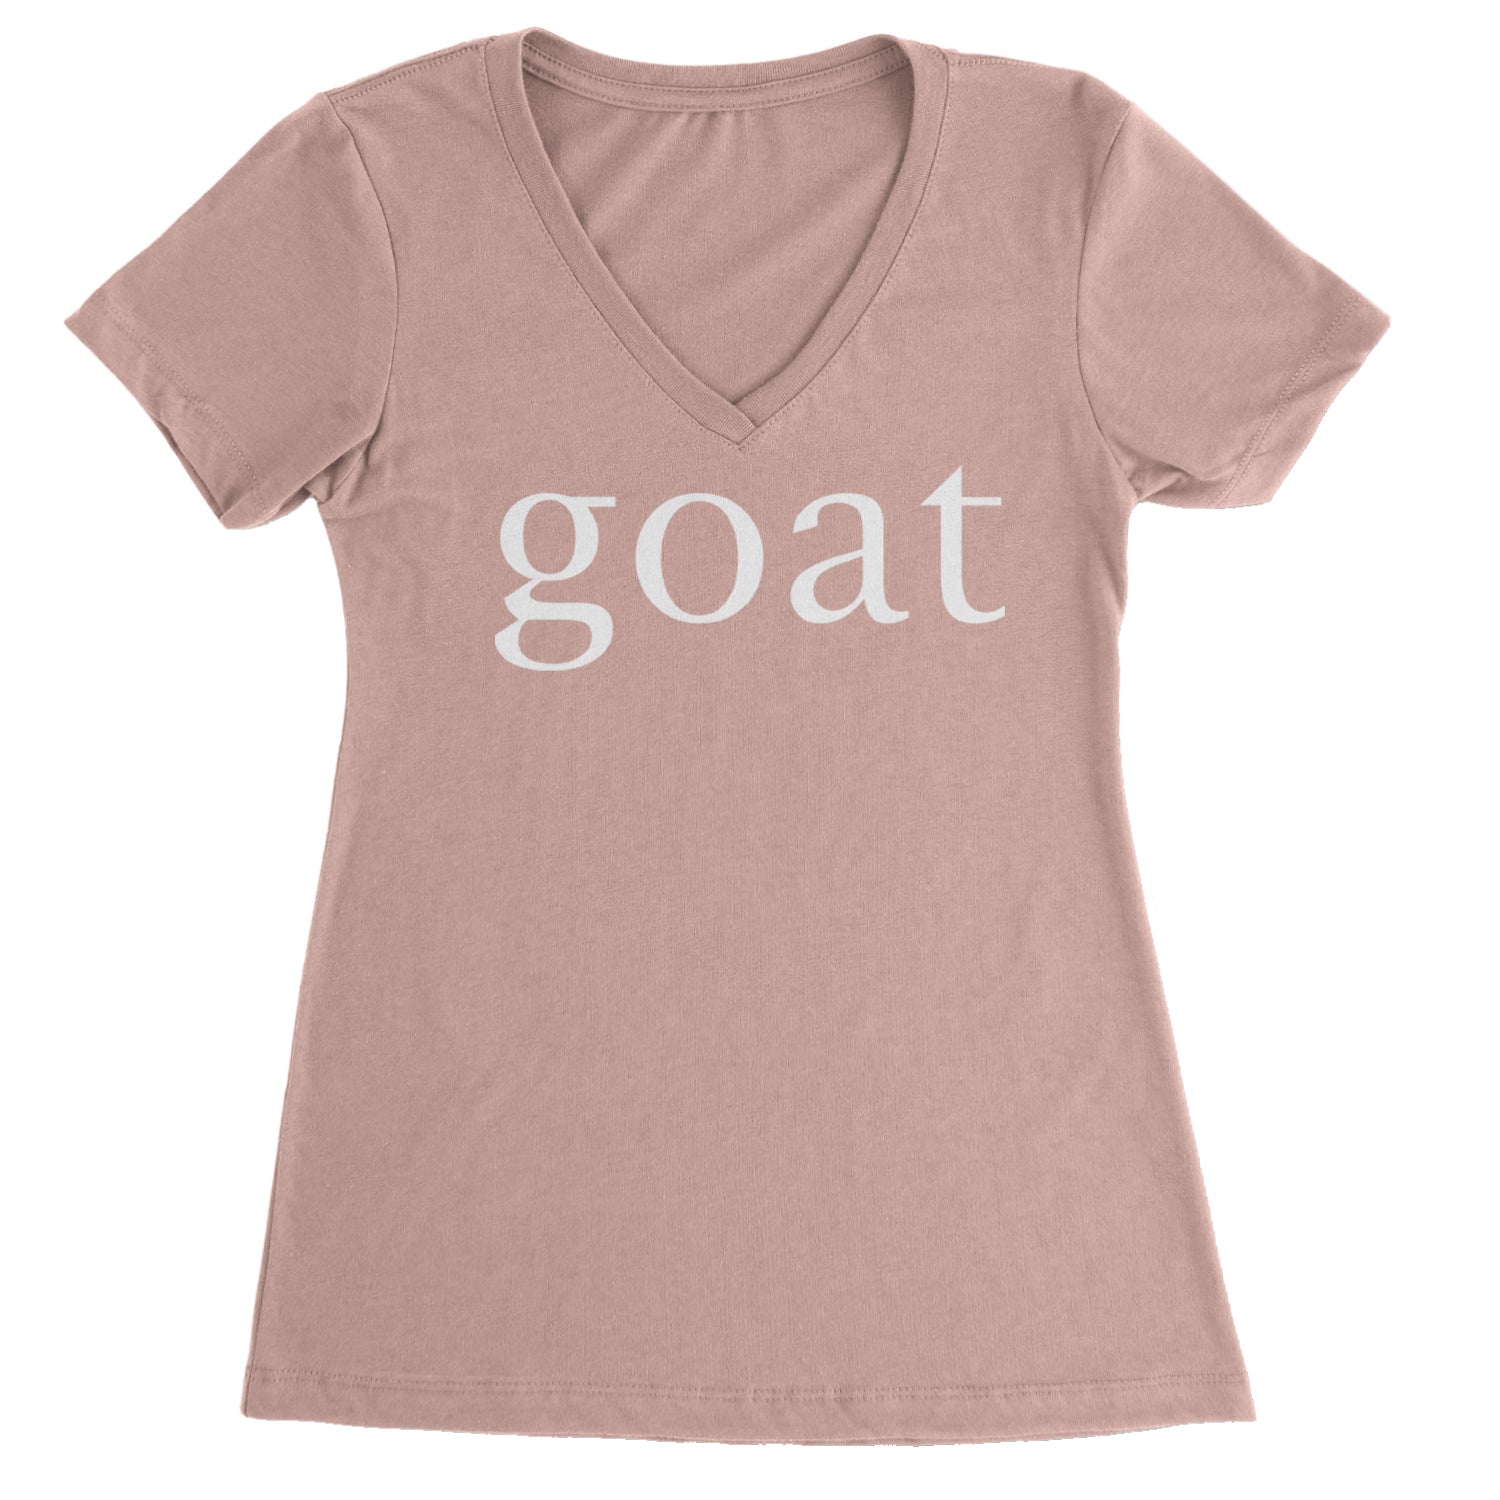 GOAT - Greatest Of All Time  Ladies V-Neck T-shirt Light Pink